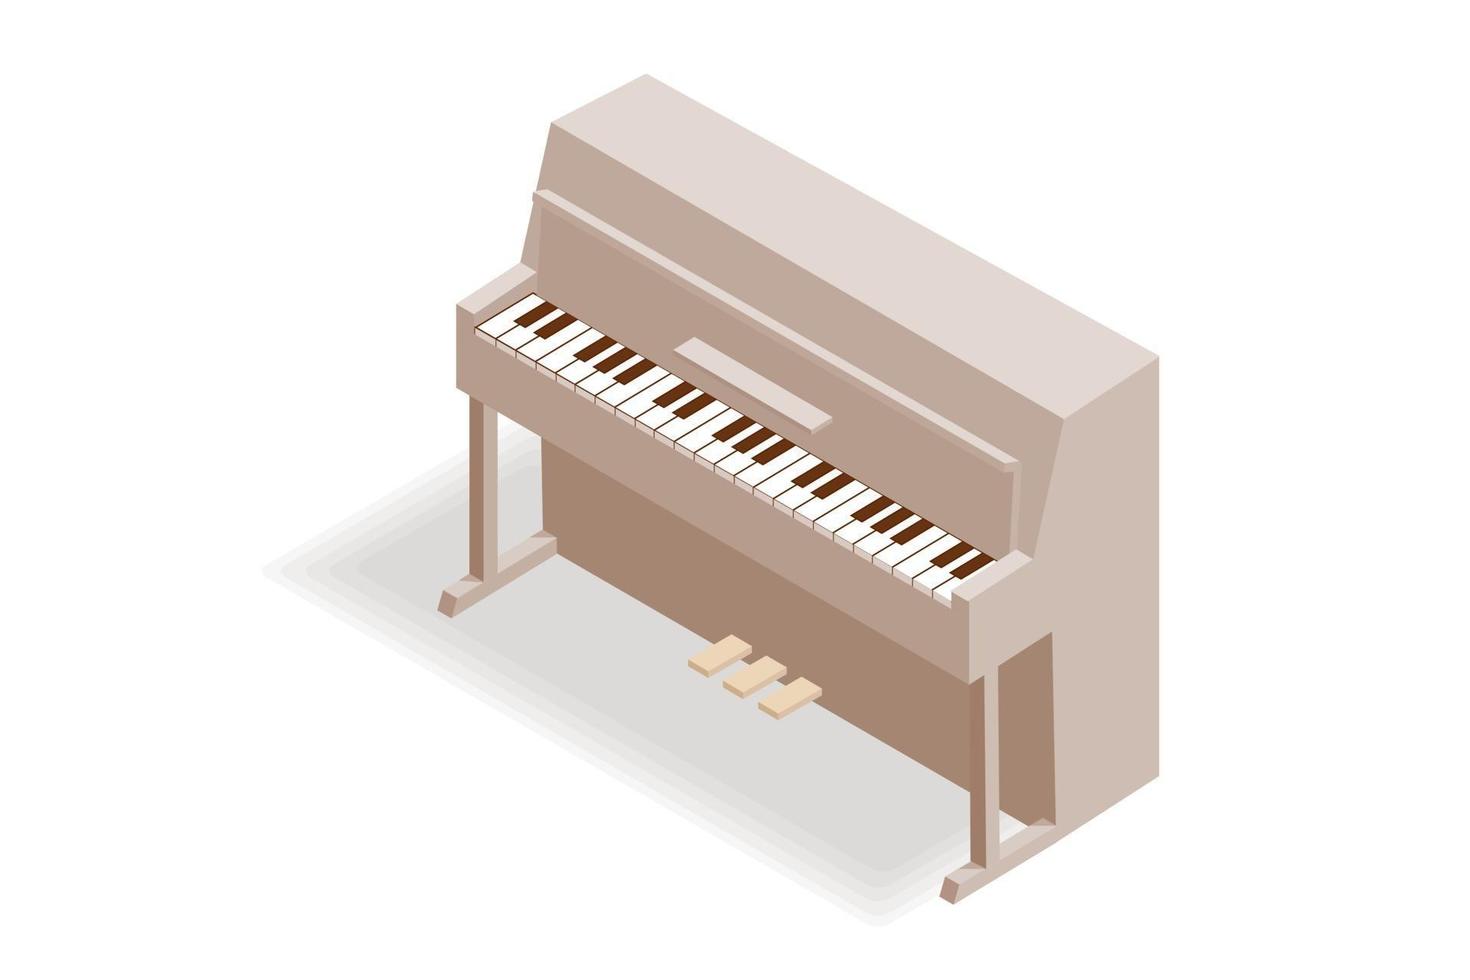 Isometric piano illustration. Vector woodden clasical, acoustic piano illustration isolated on white background.